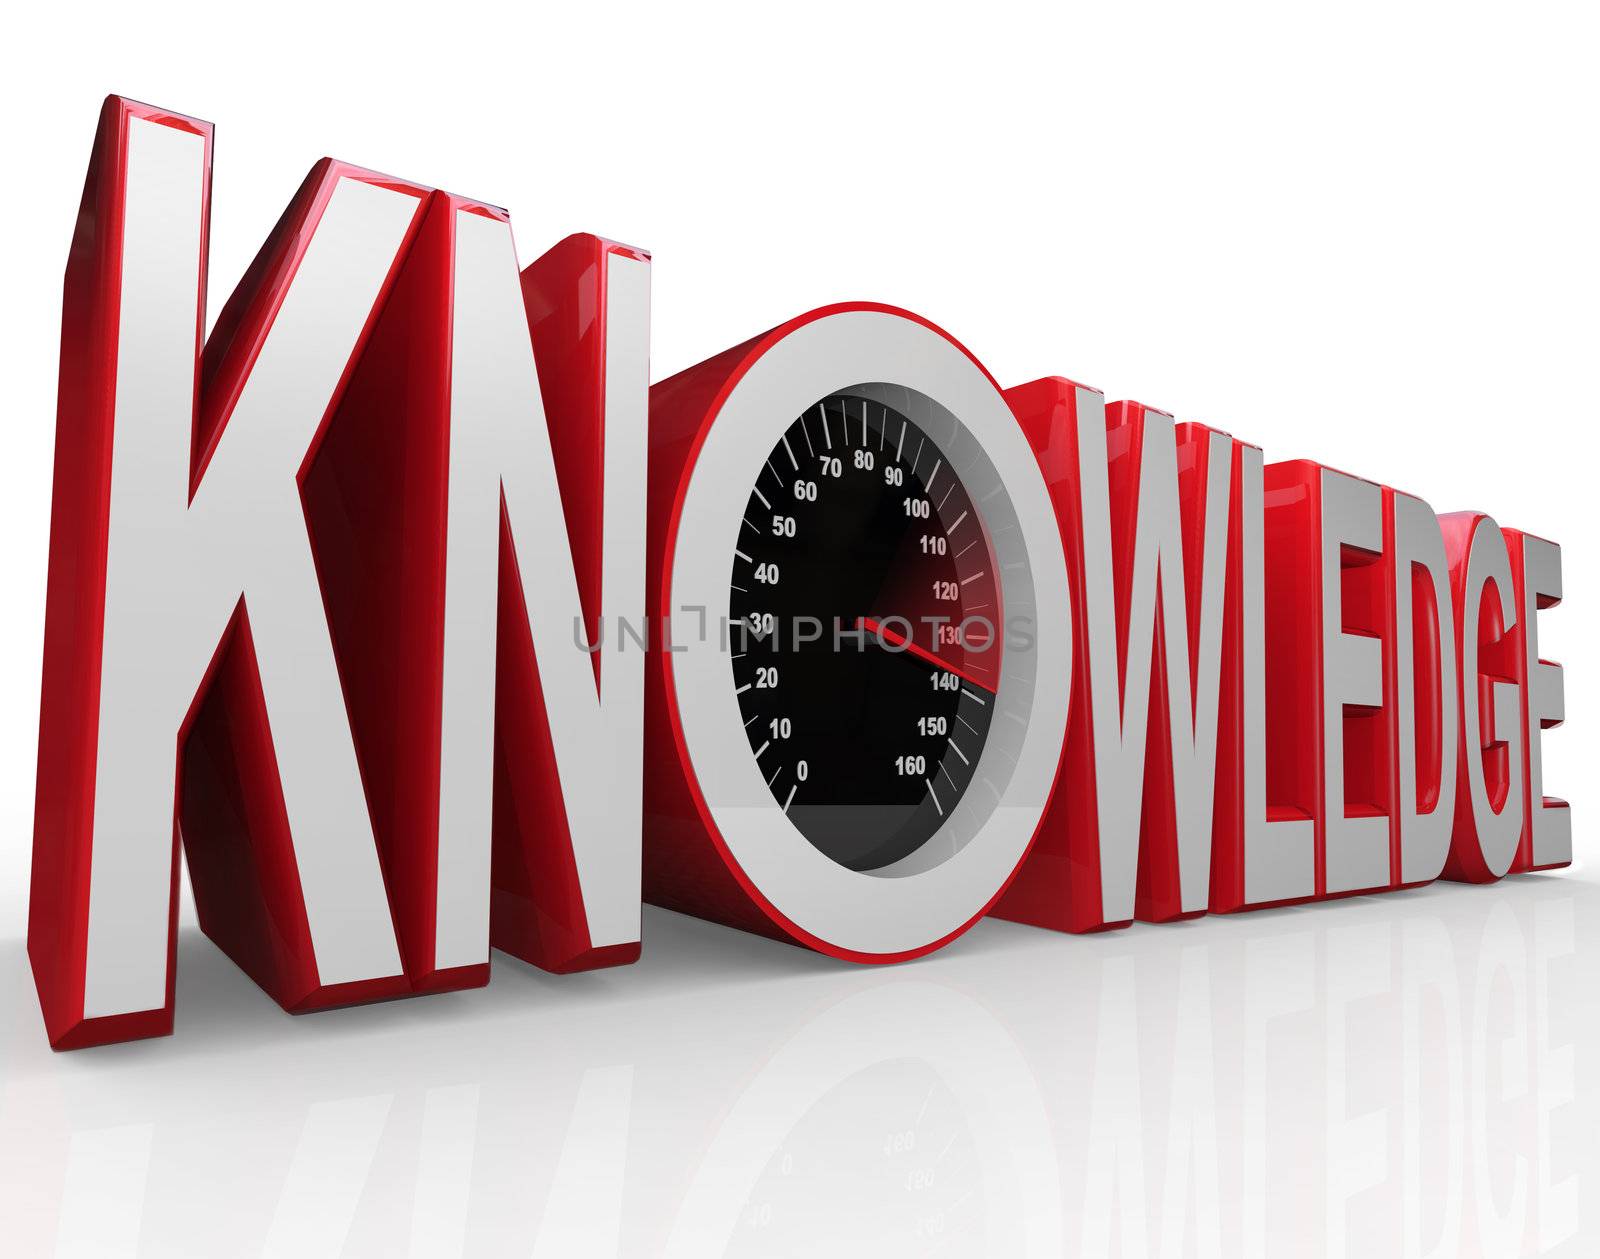 The word Knowledge with a speedometer in it symbolizing the fact that learning and gathering information is power and drives you to success